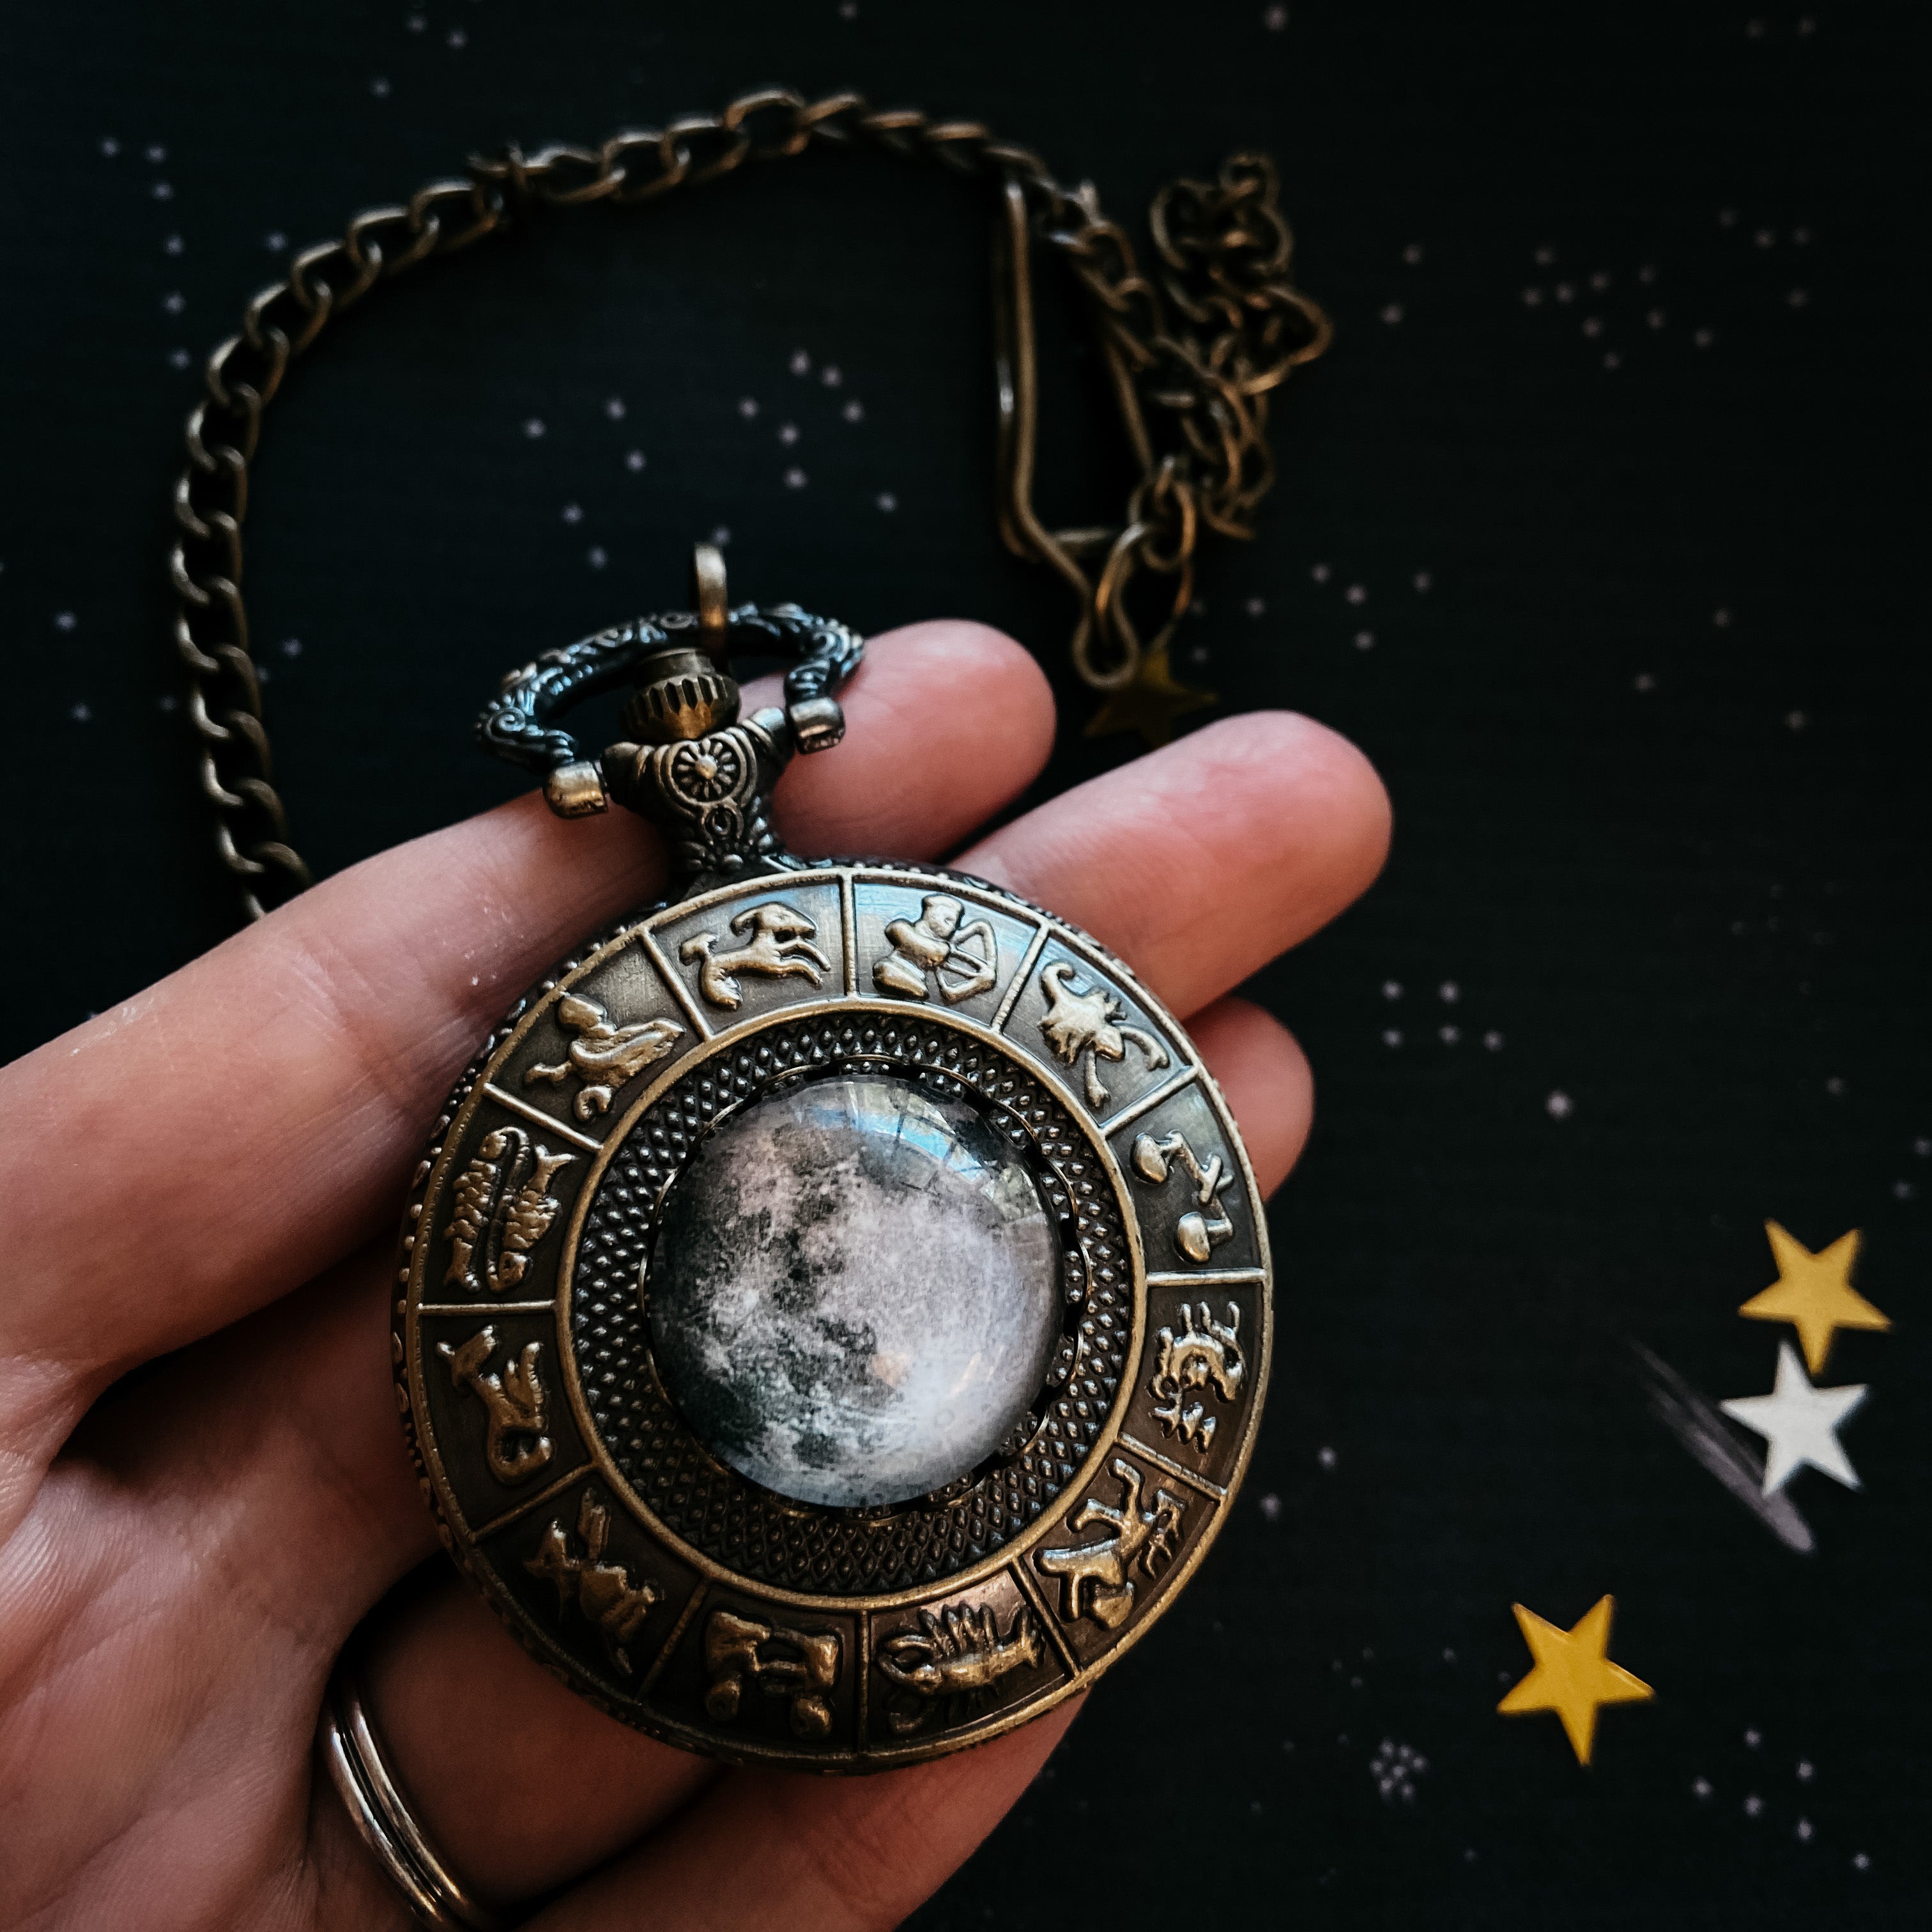 Mubco Antique Style Astrology Quartz Pocket Watch Key Chain Collectible  Showpiece Gift AC_01 Black Chrome Metal Pocket Watch Chain Price in India -  Buy Mubco Antique Style Astrology Quartz Pocket Watch Key Chain Collectible  Showpiece Gift ...